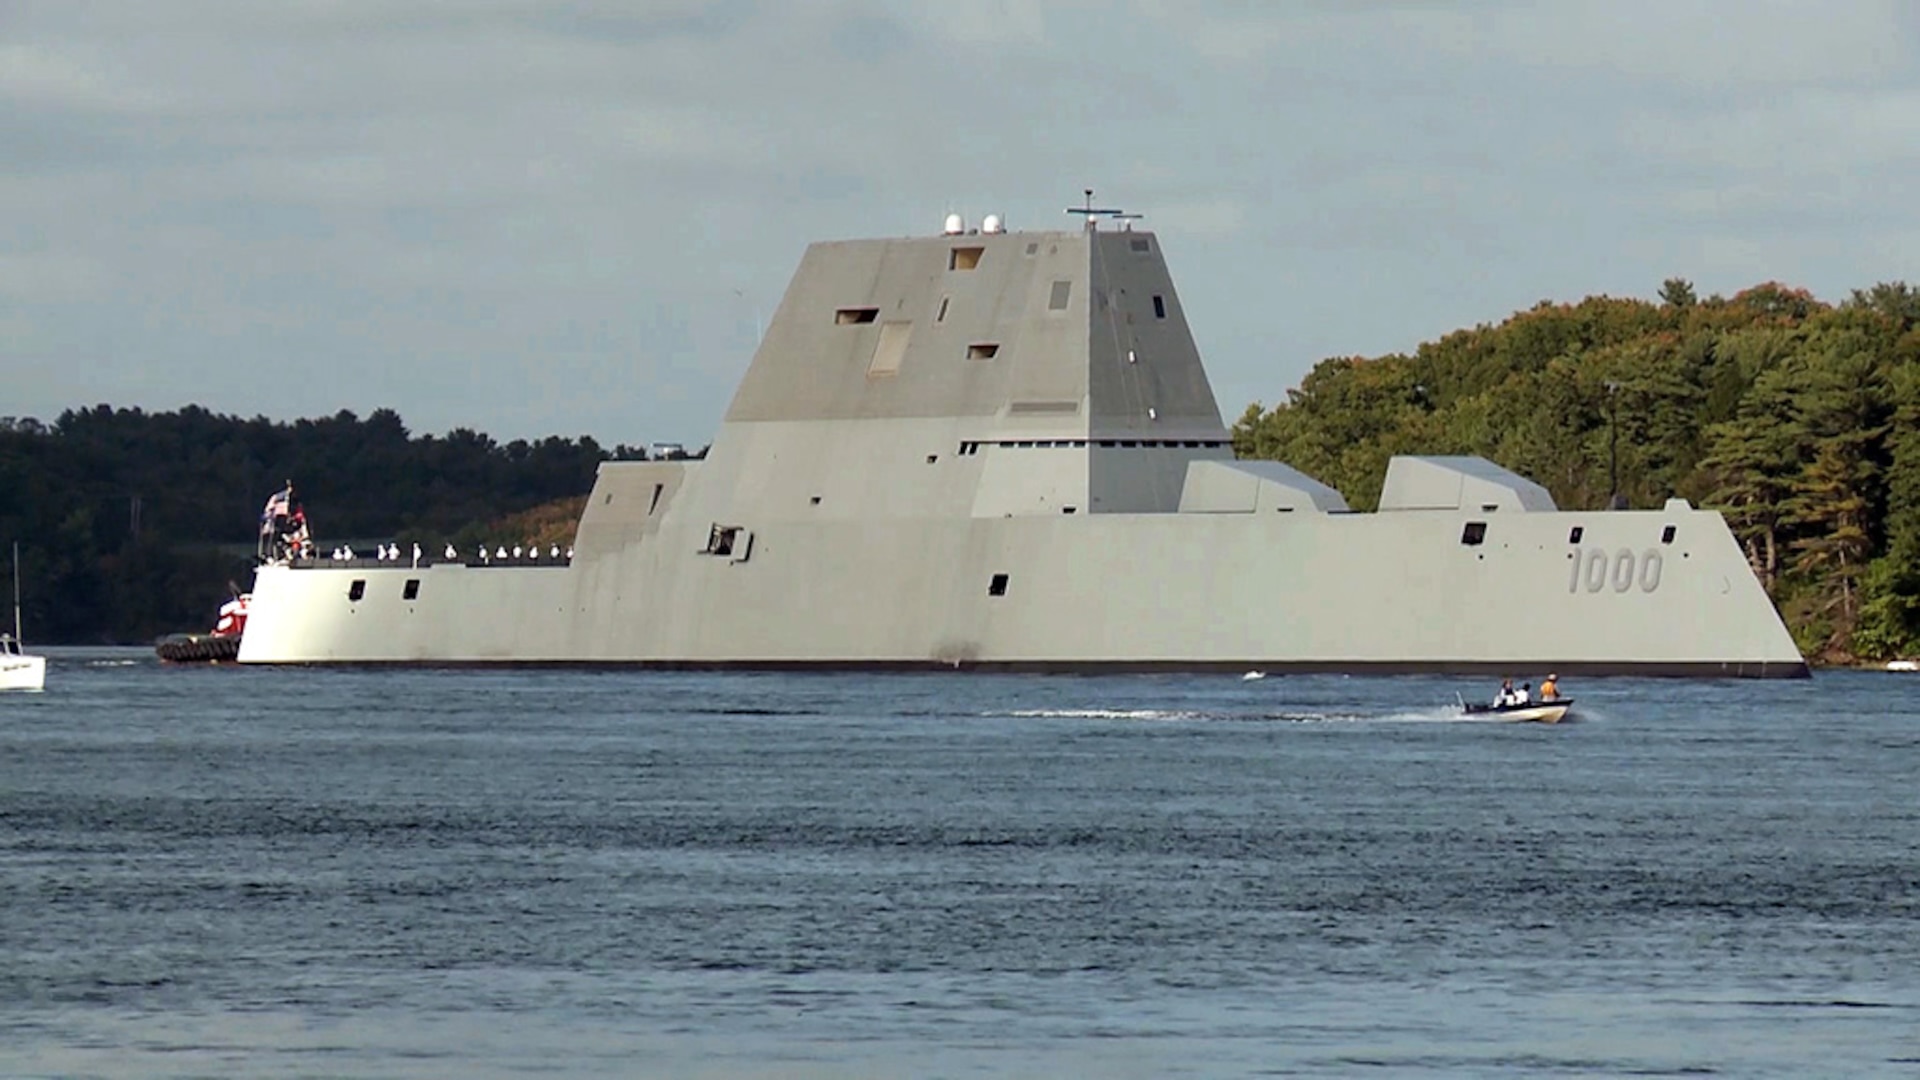 Video frame grab showing the future USS Zumwalt (DDG 1000) departing Bath Iron Works marking the beginning of a 3-month journey to its new homeport in San Diego, Sept. 7, 2016. Crewed by 147 Sailors, Zumwalt is the lead ship of a class of next-generation multi-mission destroyers designed to strengthen naval power. They are capable of performing critical maritime missions and enhance the Navy's ability to provide deterrence, power projection and sea control. 